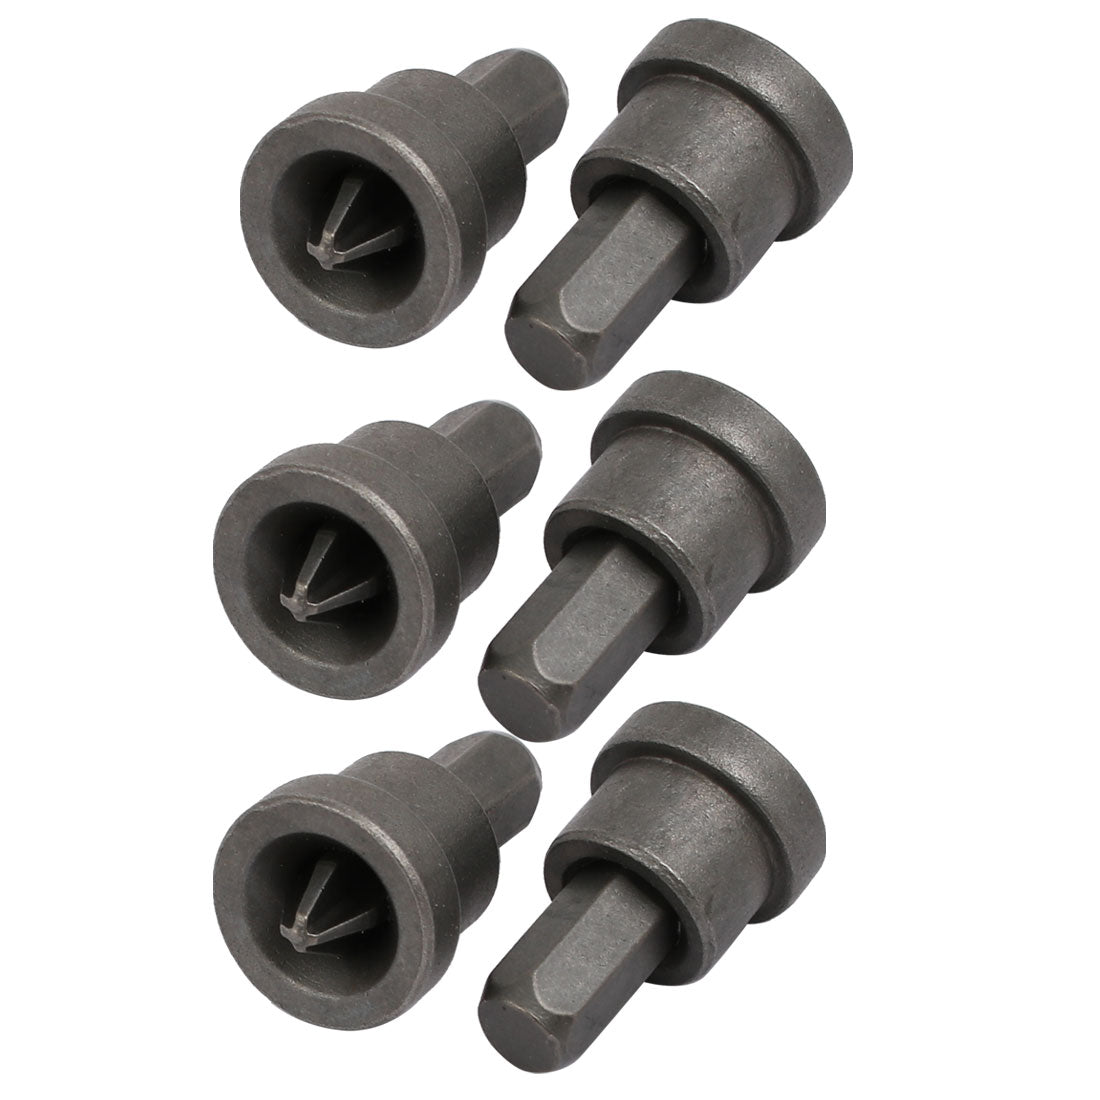 uxcell Uxcell PH2 Phillips Bit Magnetic Tip Hex Shank Drywall Screw Setter Gray 6pcs